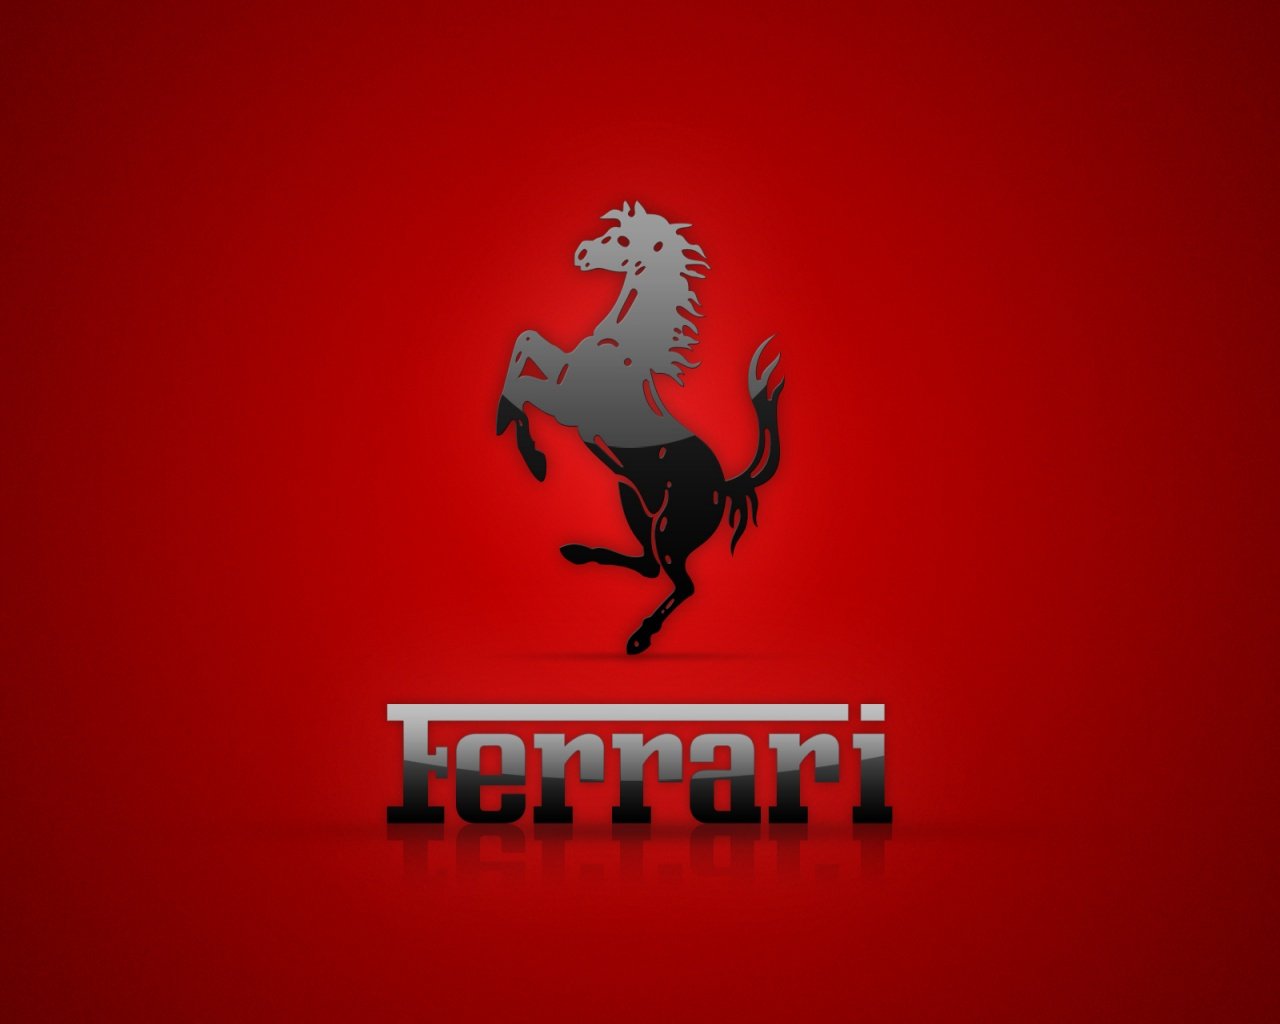 cool wallpapers ferrari logo pictures Desktop Backgrounds for Free